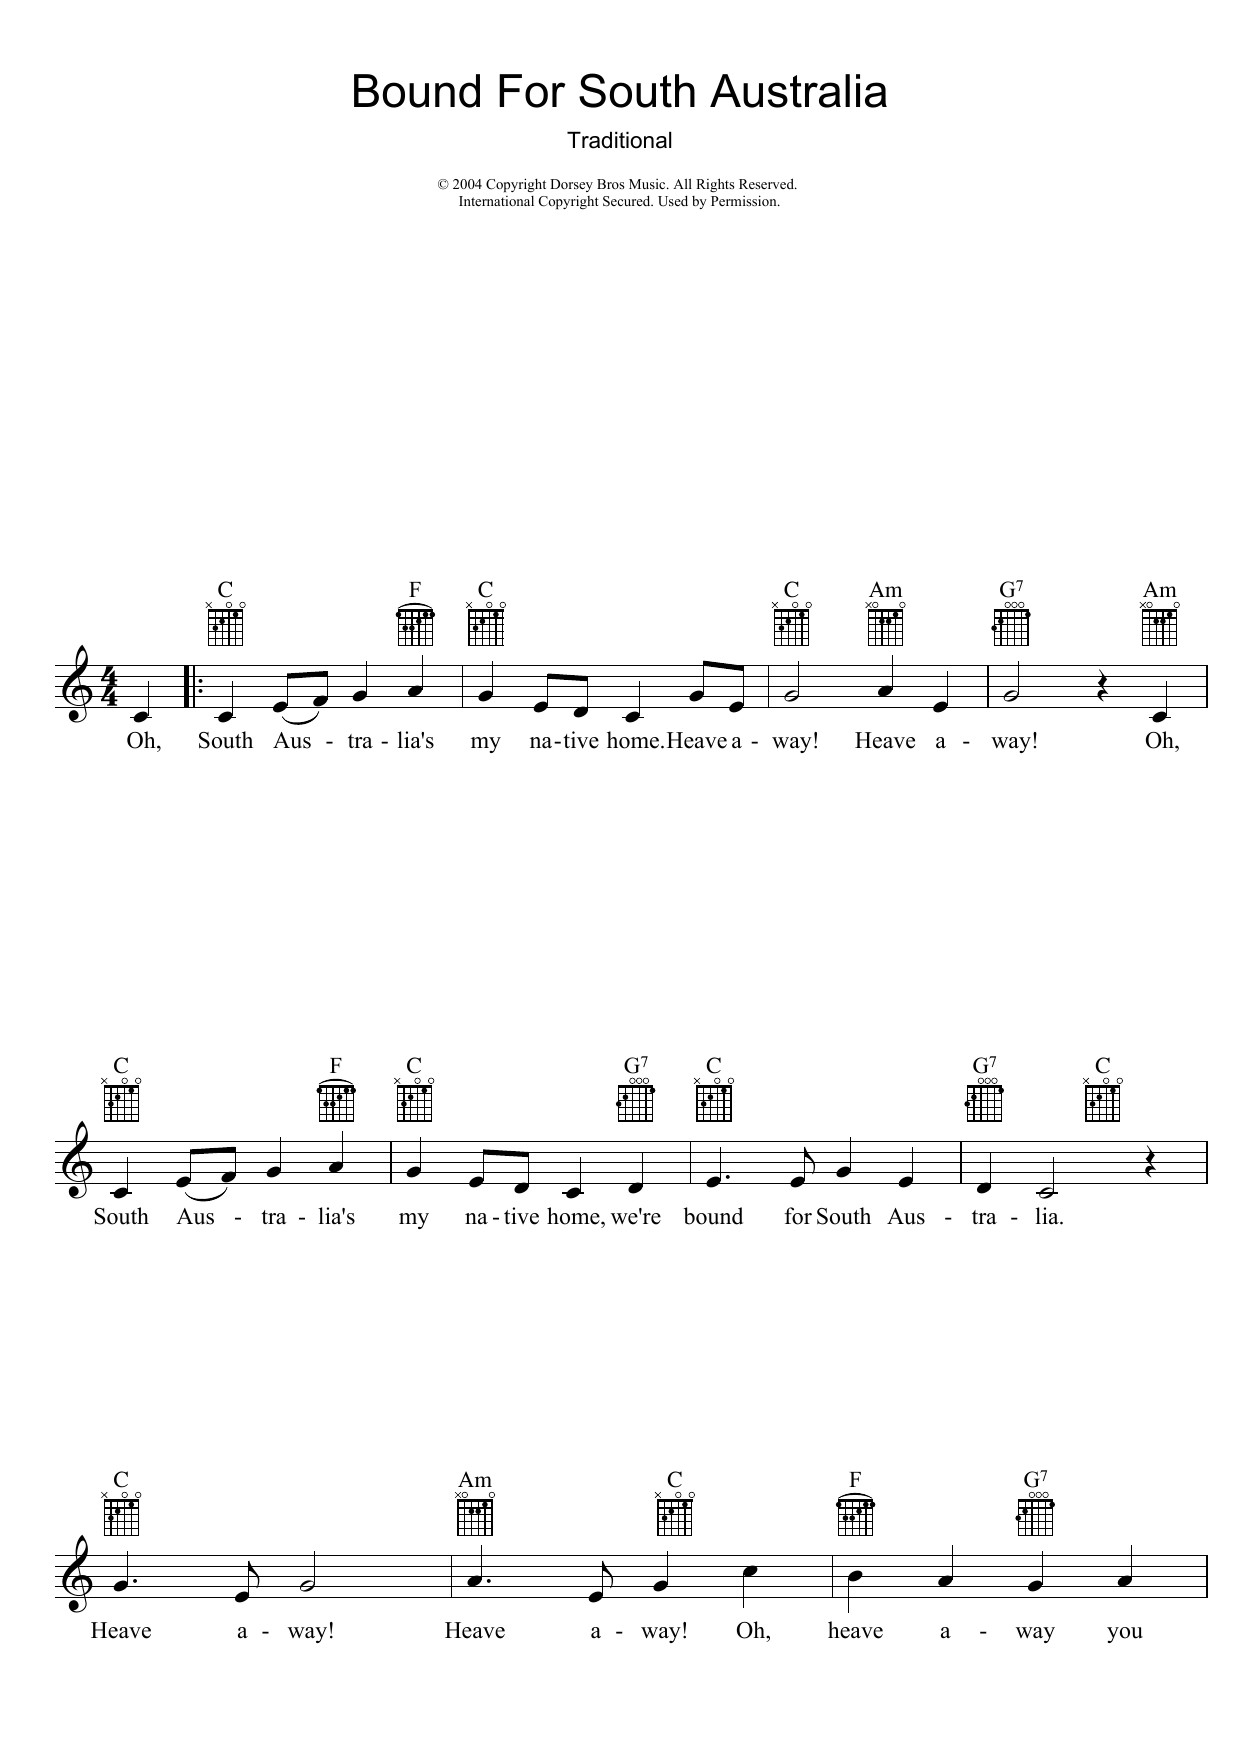 Download Traditional Bound For South Australia Sheet Music